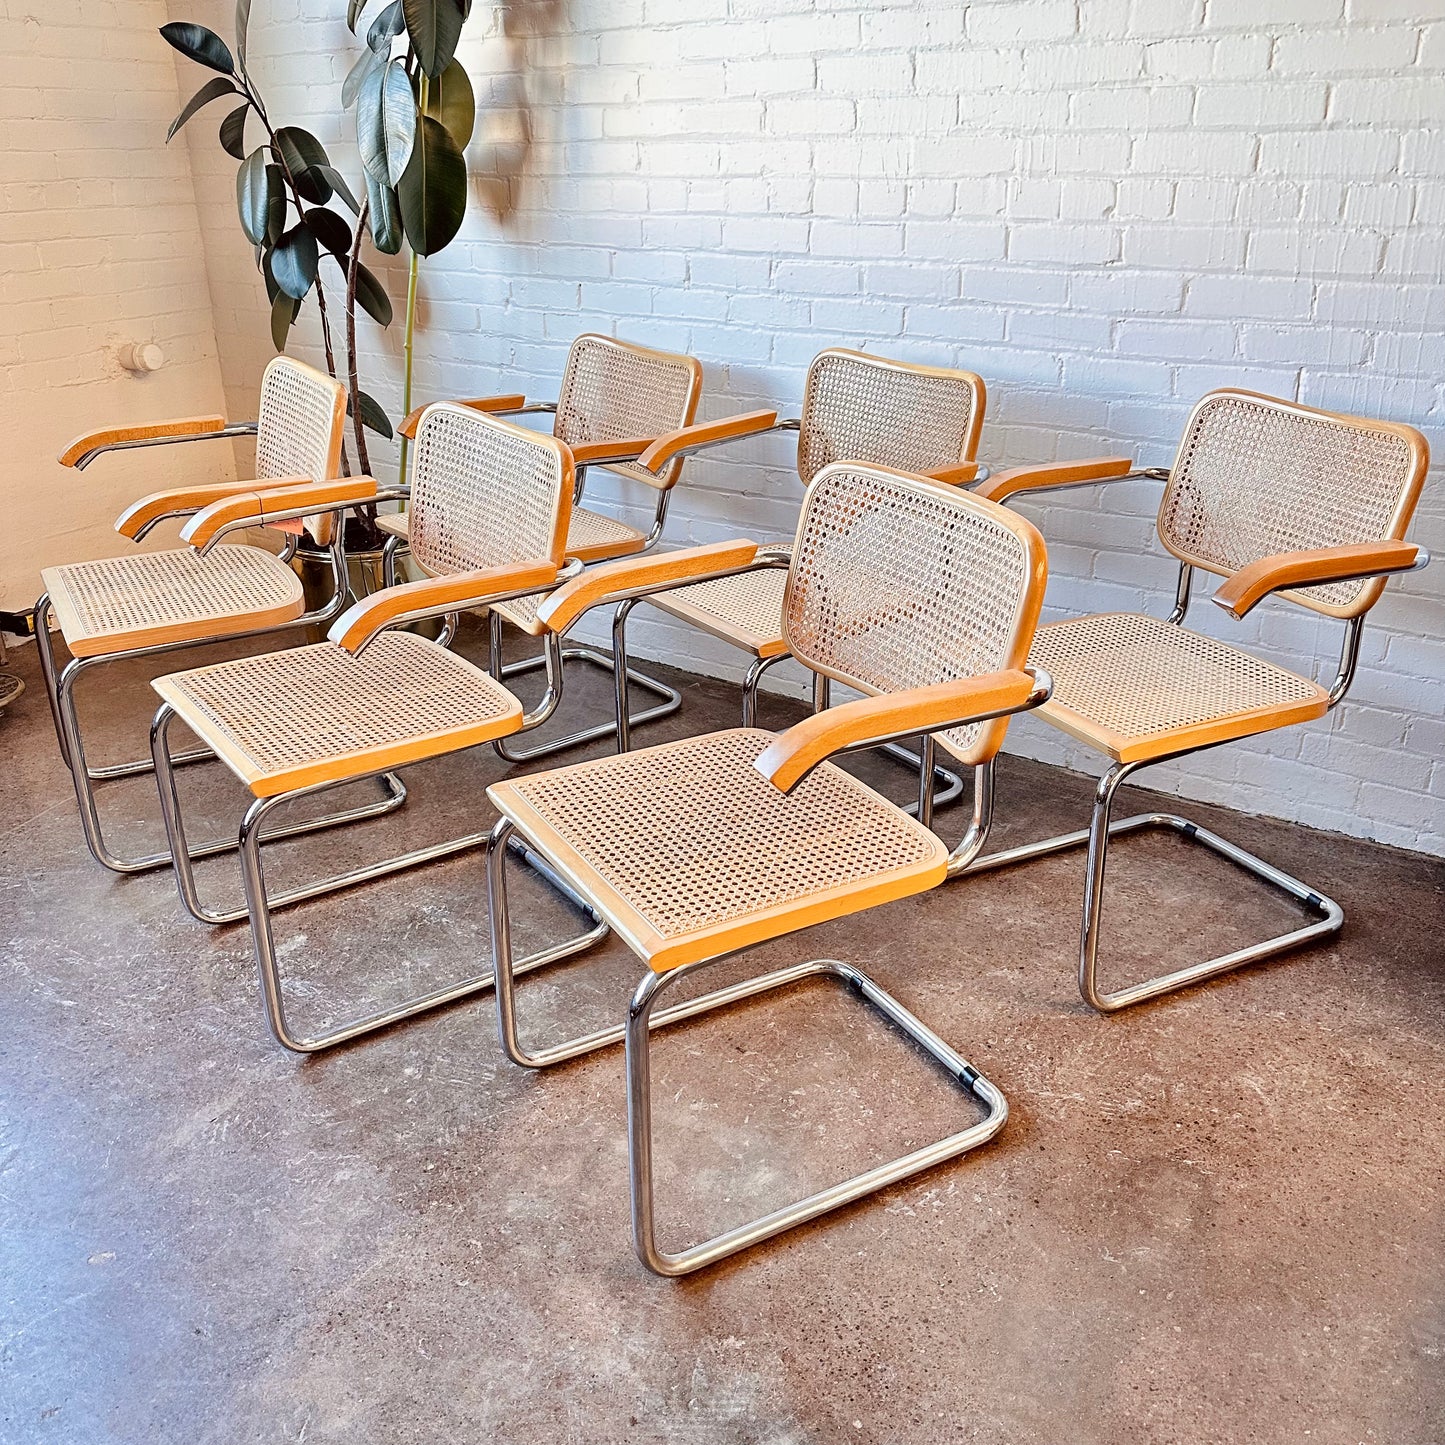 MARCEL BREUER CESCA CANED ARM CHAIRS - SET OF 6 MADE IN ITALY